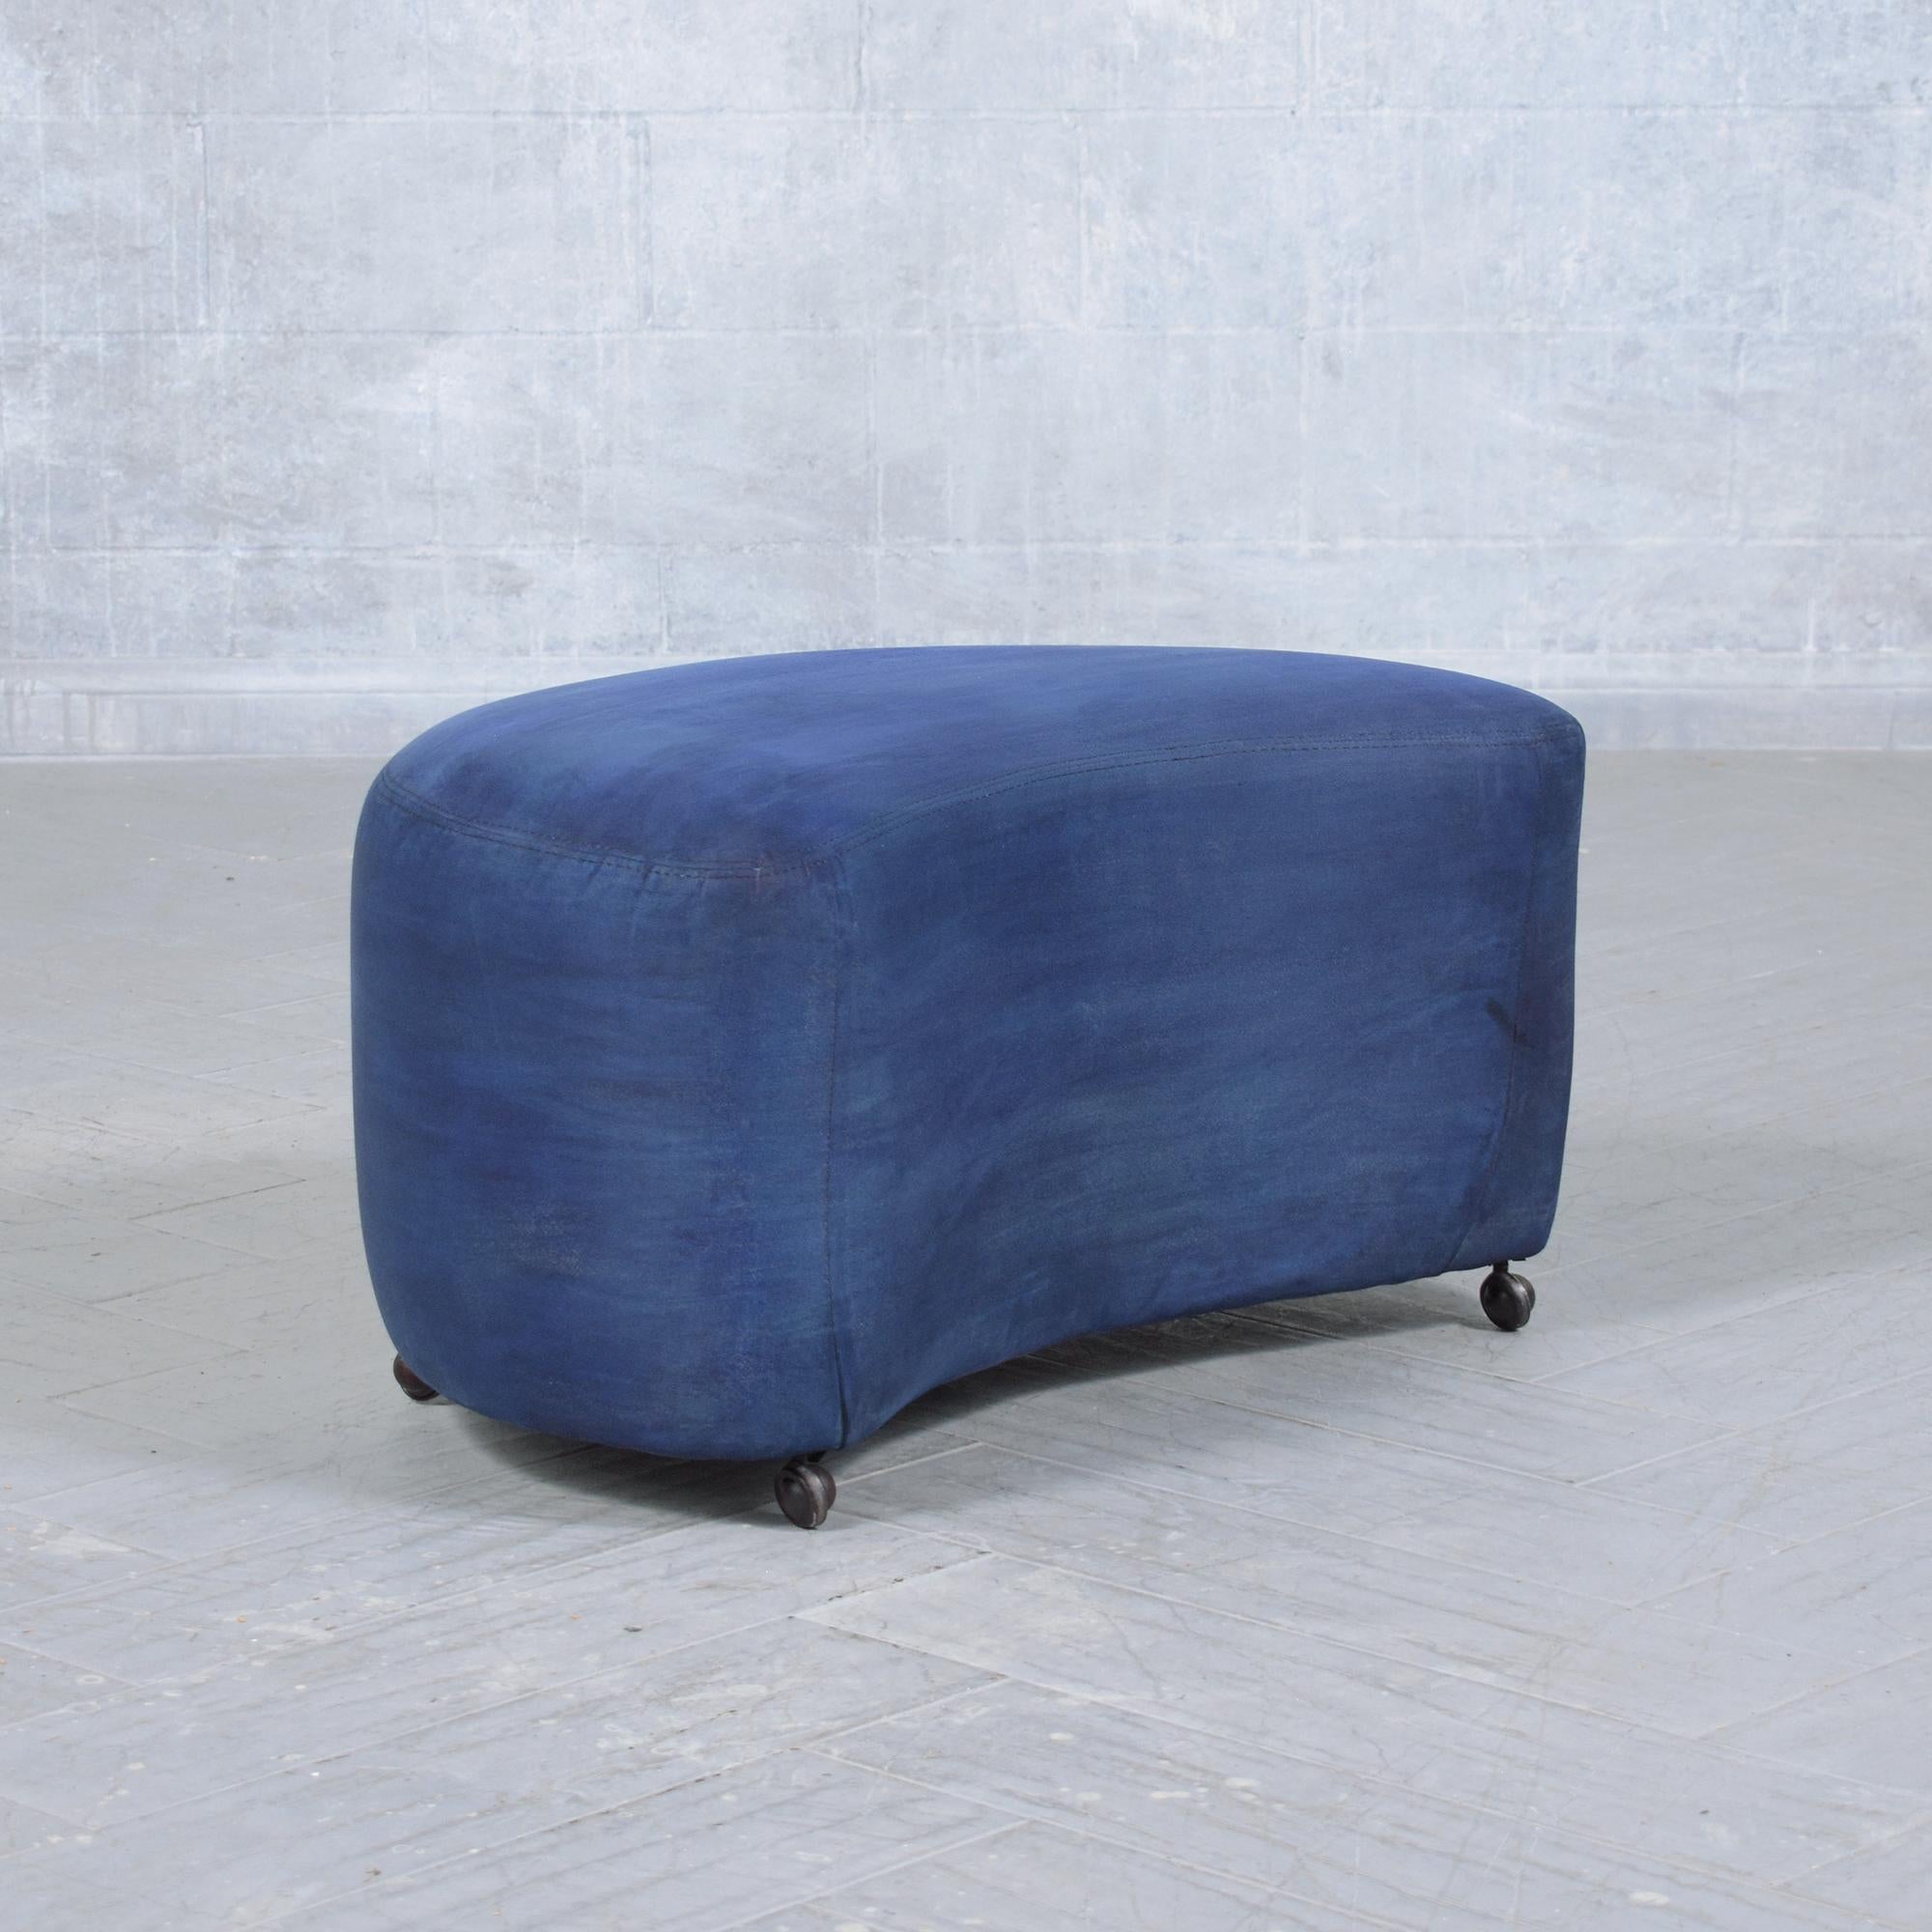 Introducing our Mid-Century Modern ottoman, hand-crafted from wood and in great condition. This unique ottoman showcases a standout design, adorned with a navy blue suede fabric and fine topstitched finishing details. Resting on round, black-colored